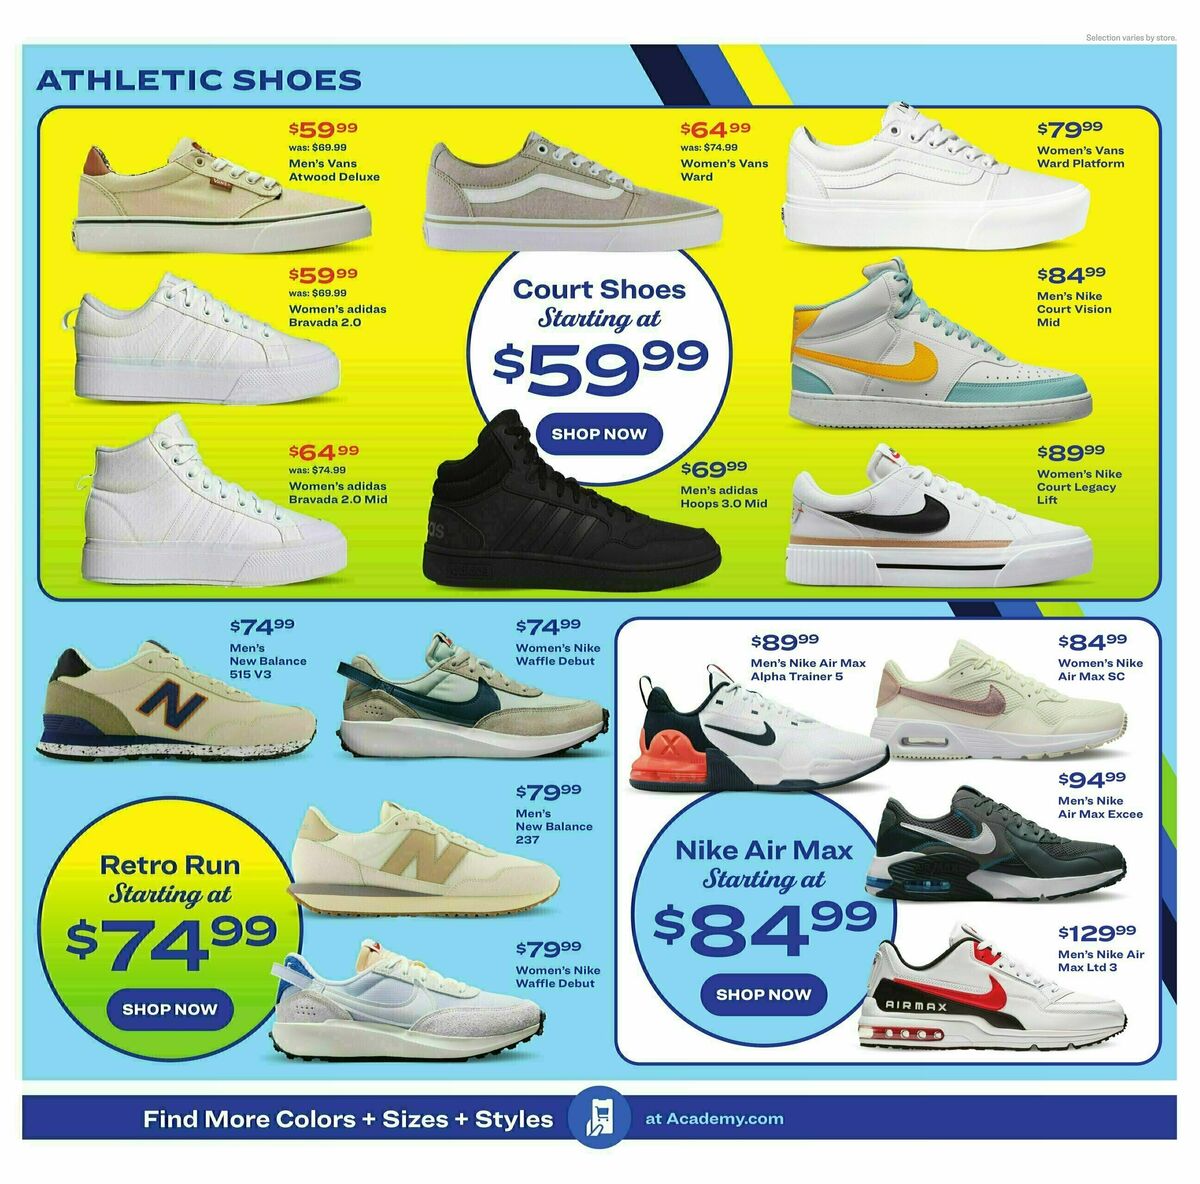 Academy Sports + Outdoors Weekly Ad from July 10